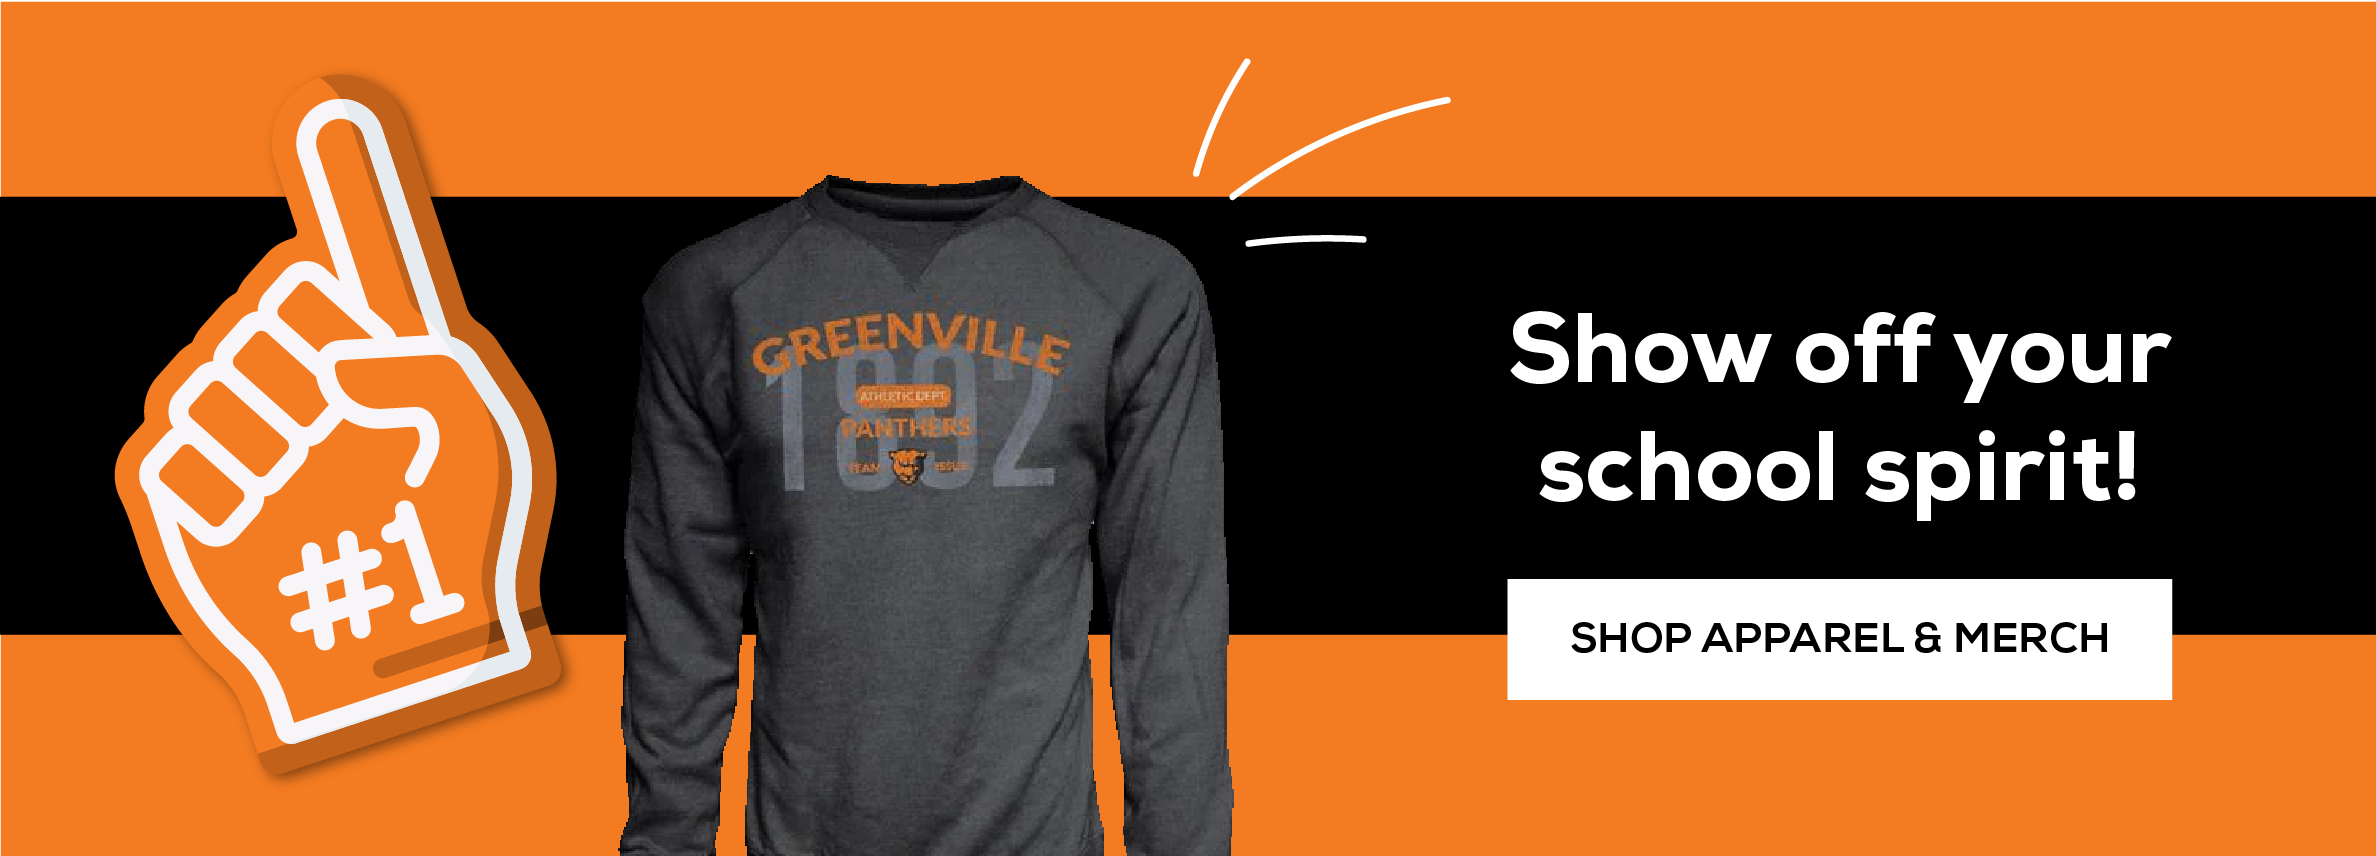 Show off your school spirit! Shop Apparel and Merch